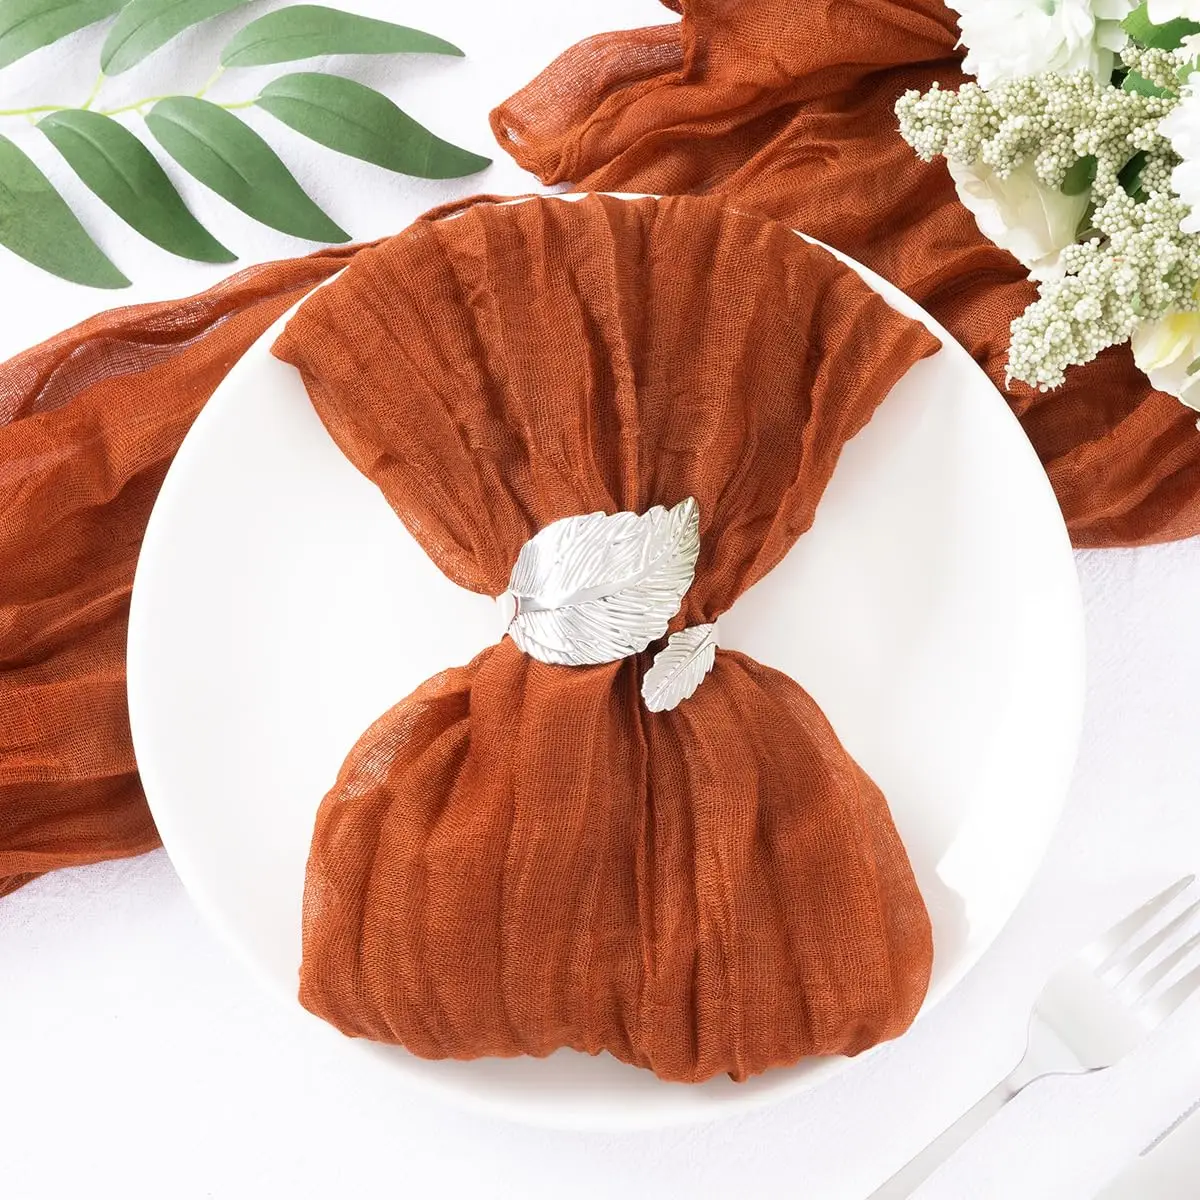 100 Pcs Gauze Cheesecloth Napkins 19.7 X 19.7 Inch Dinner Cloth Napkins with Wrinkled Decorative Cloth Napkins for Home Wedding